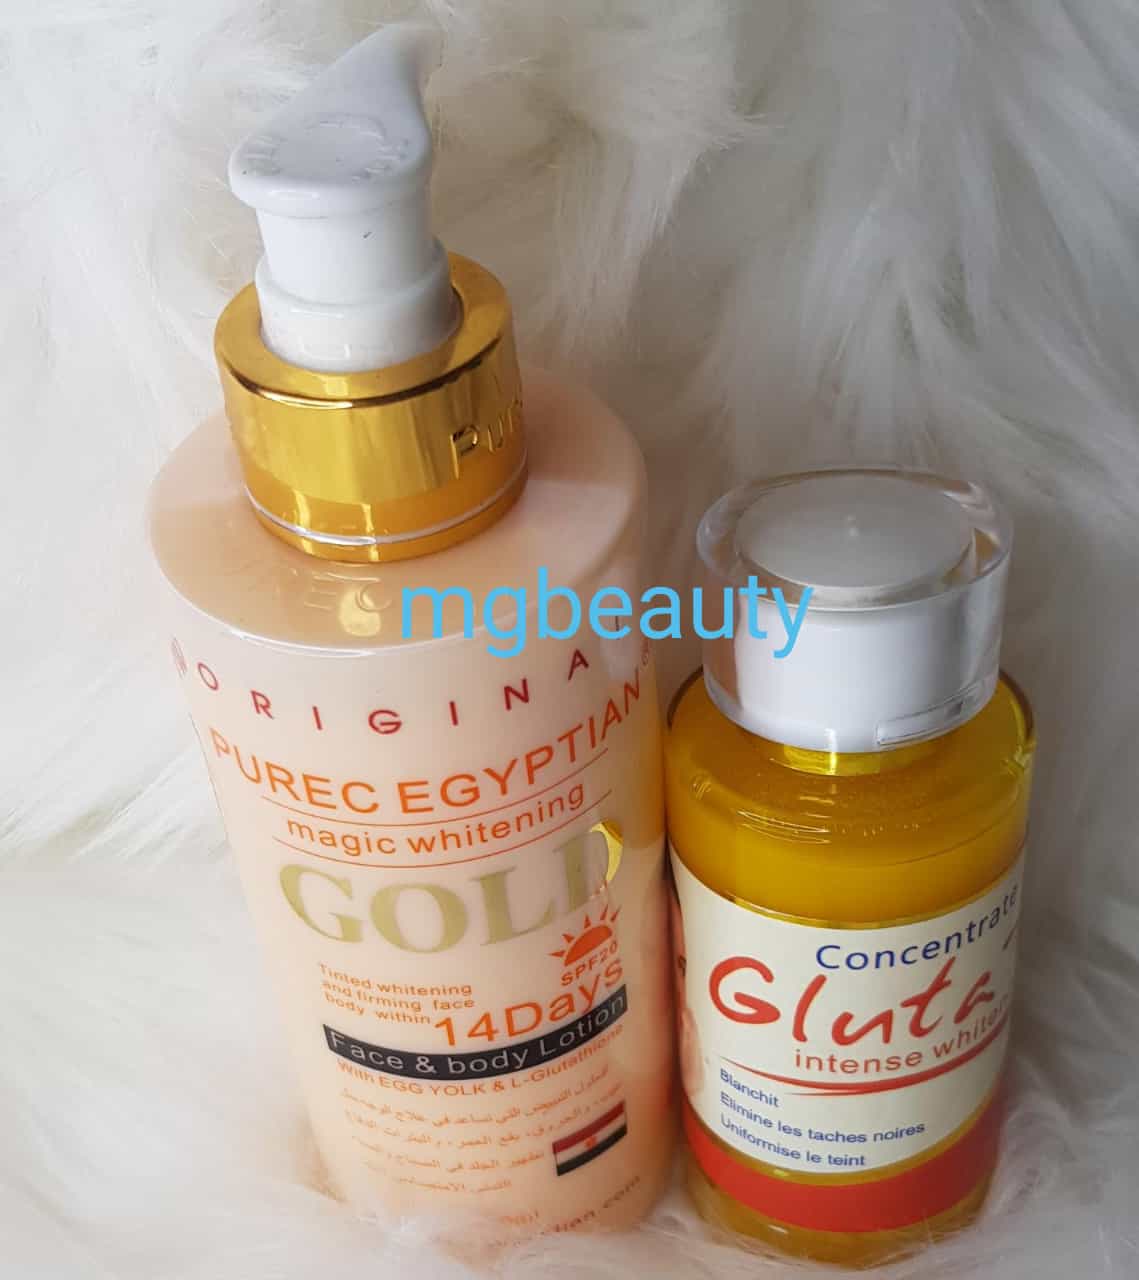 PUREC EGYPTIAN GOLD WHITENING LOTION and Concentrated Serum Glut – MGbeauty Place